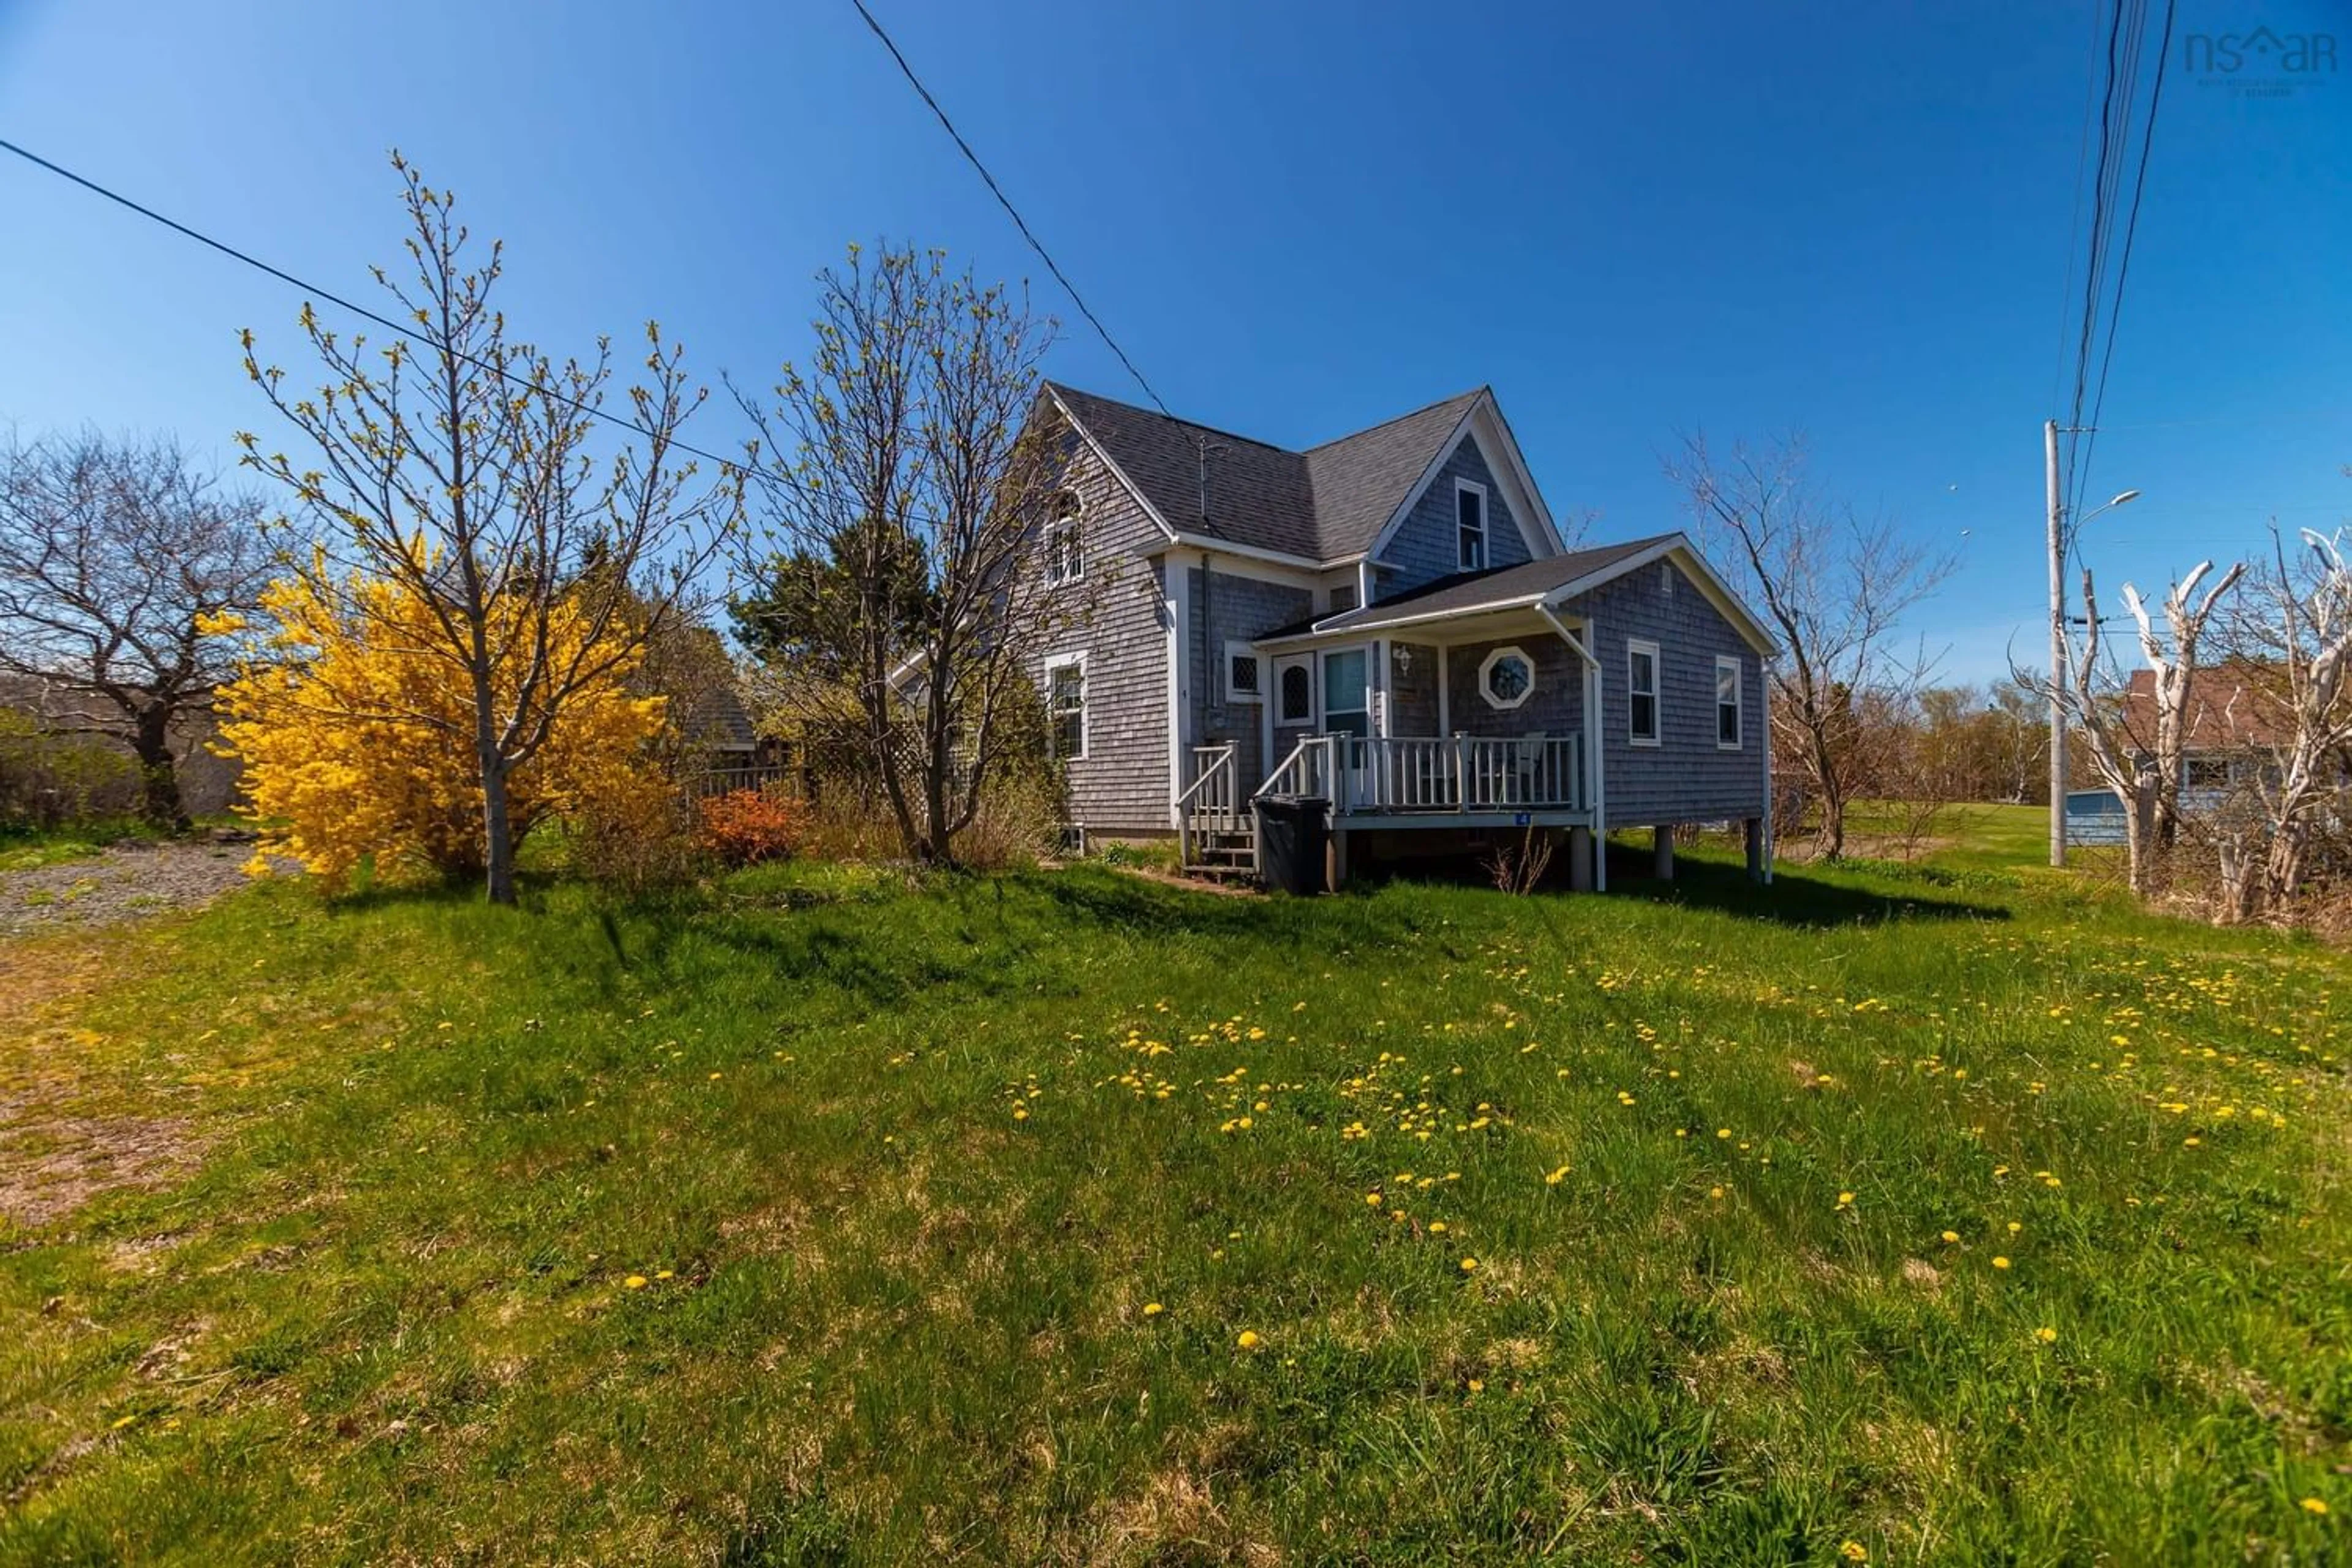 Cottage for 4 Phinney Cove Rd, Phinneys Cove Nova Scotia B0S 1L0